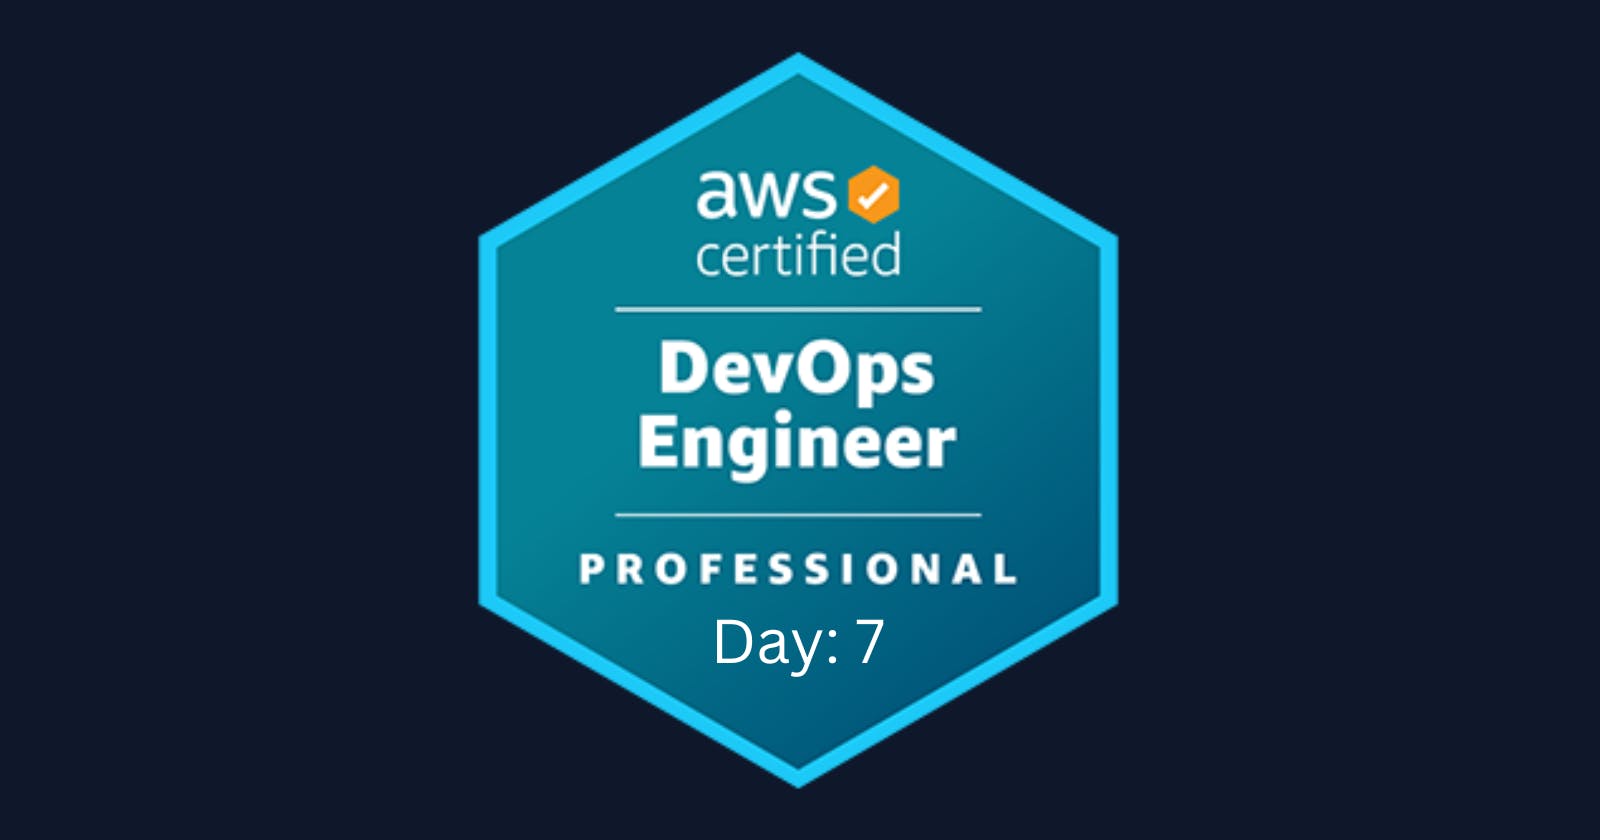 🚀 Exciting Day 7 of My AWS DevOps Engineer Professional Journey! 🚀